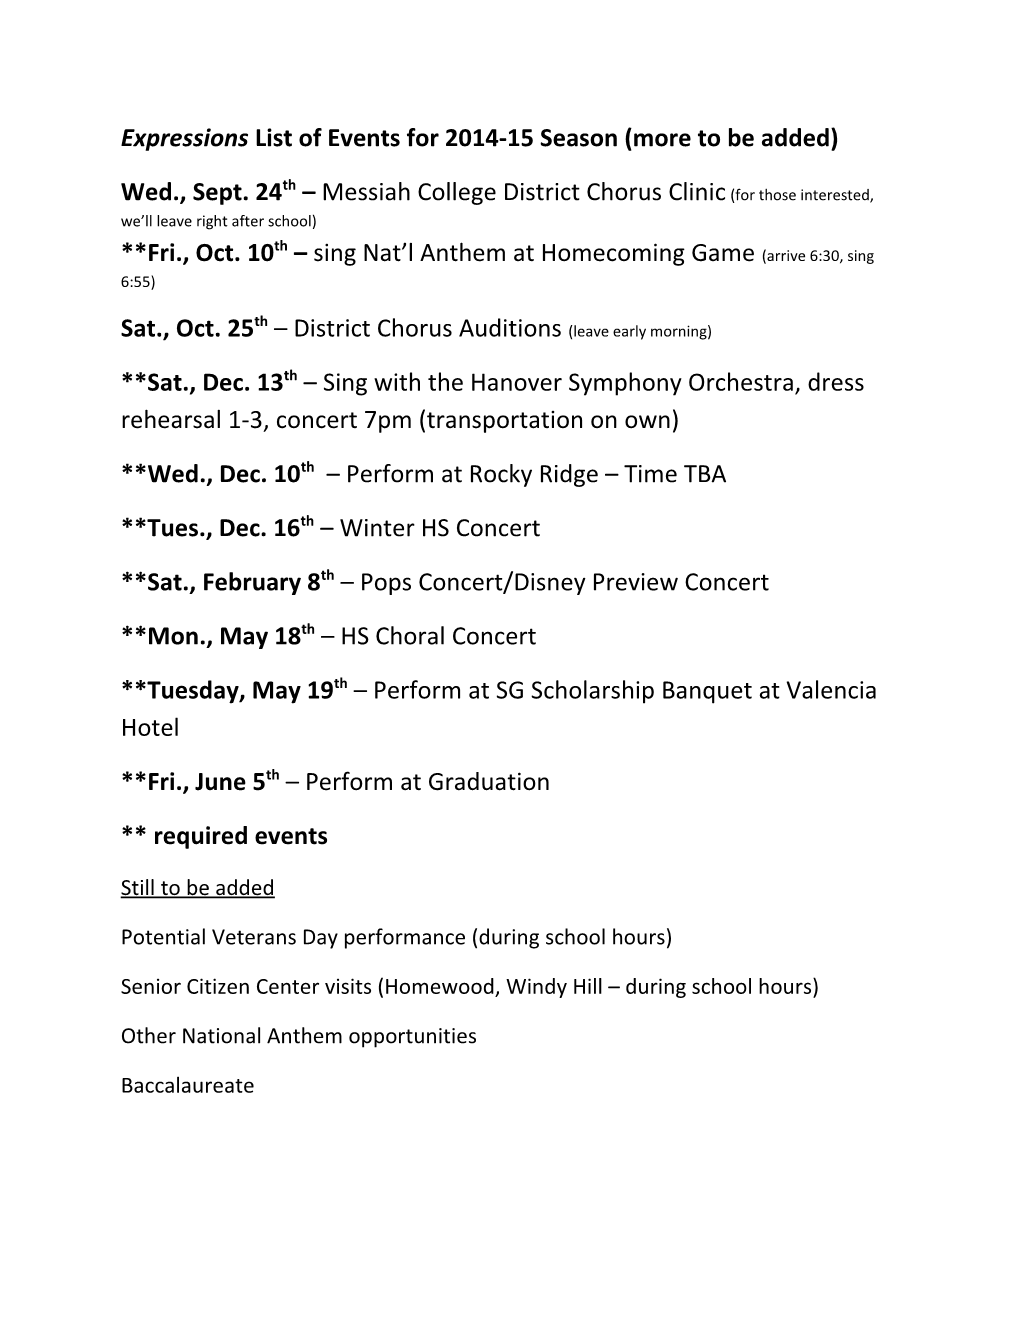 Expressions List of Events for 2014-15 Season (More to Be Added)